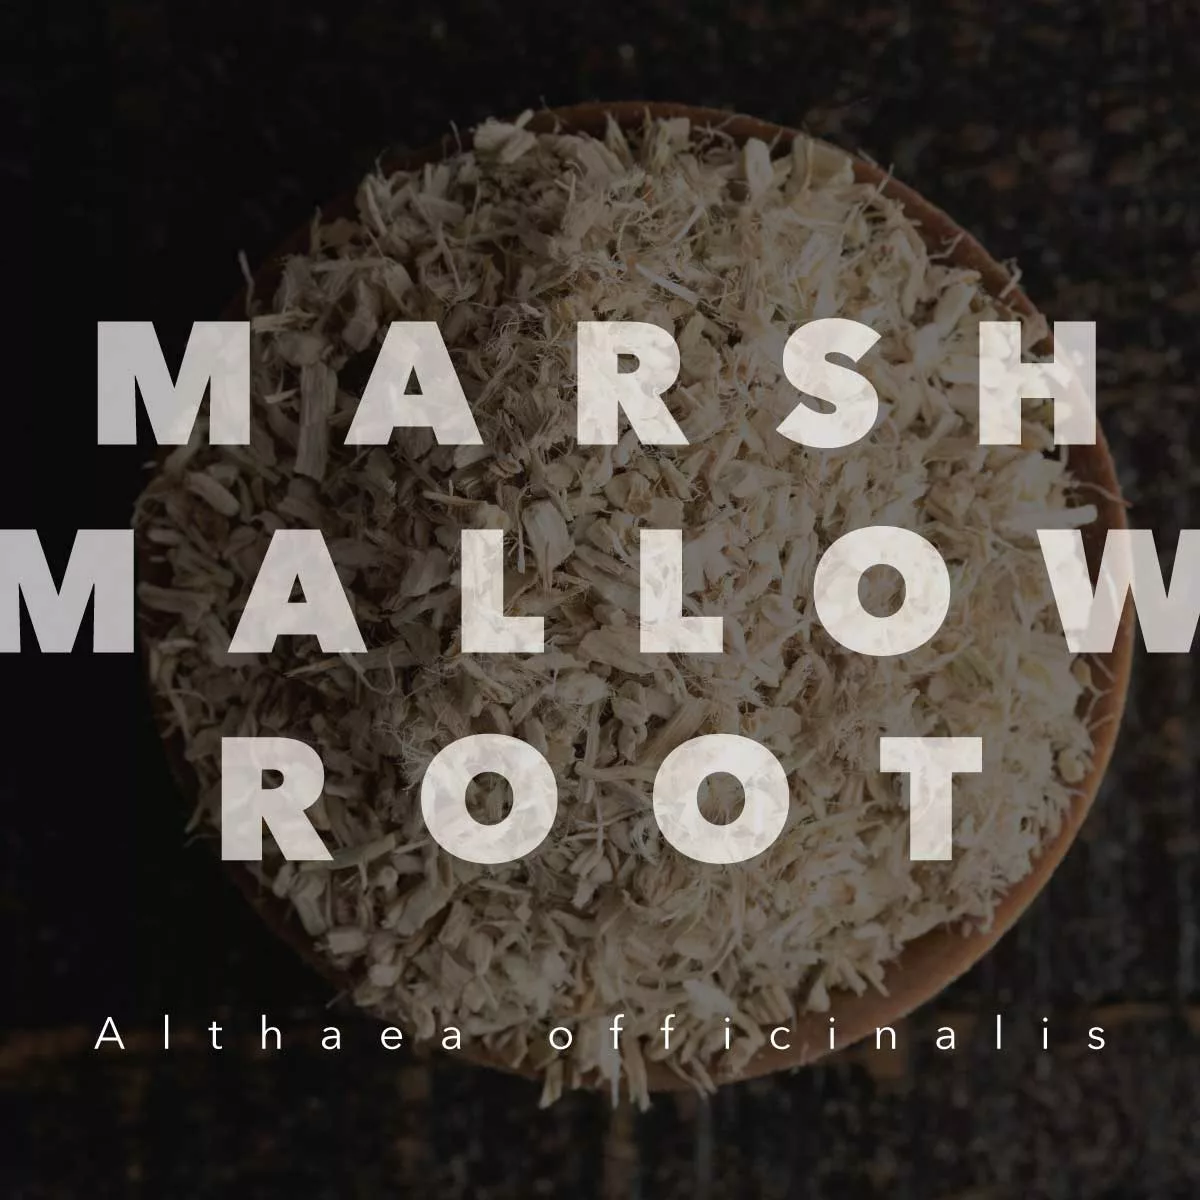 Marshmallow Root: Not for S’mores!